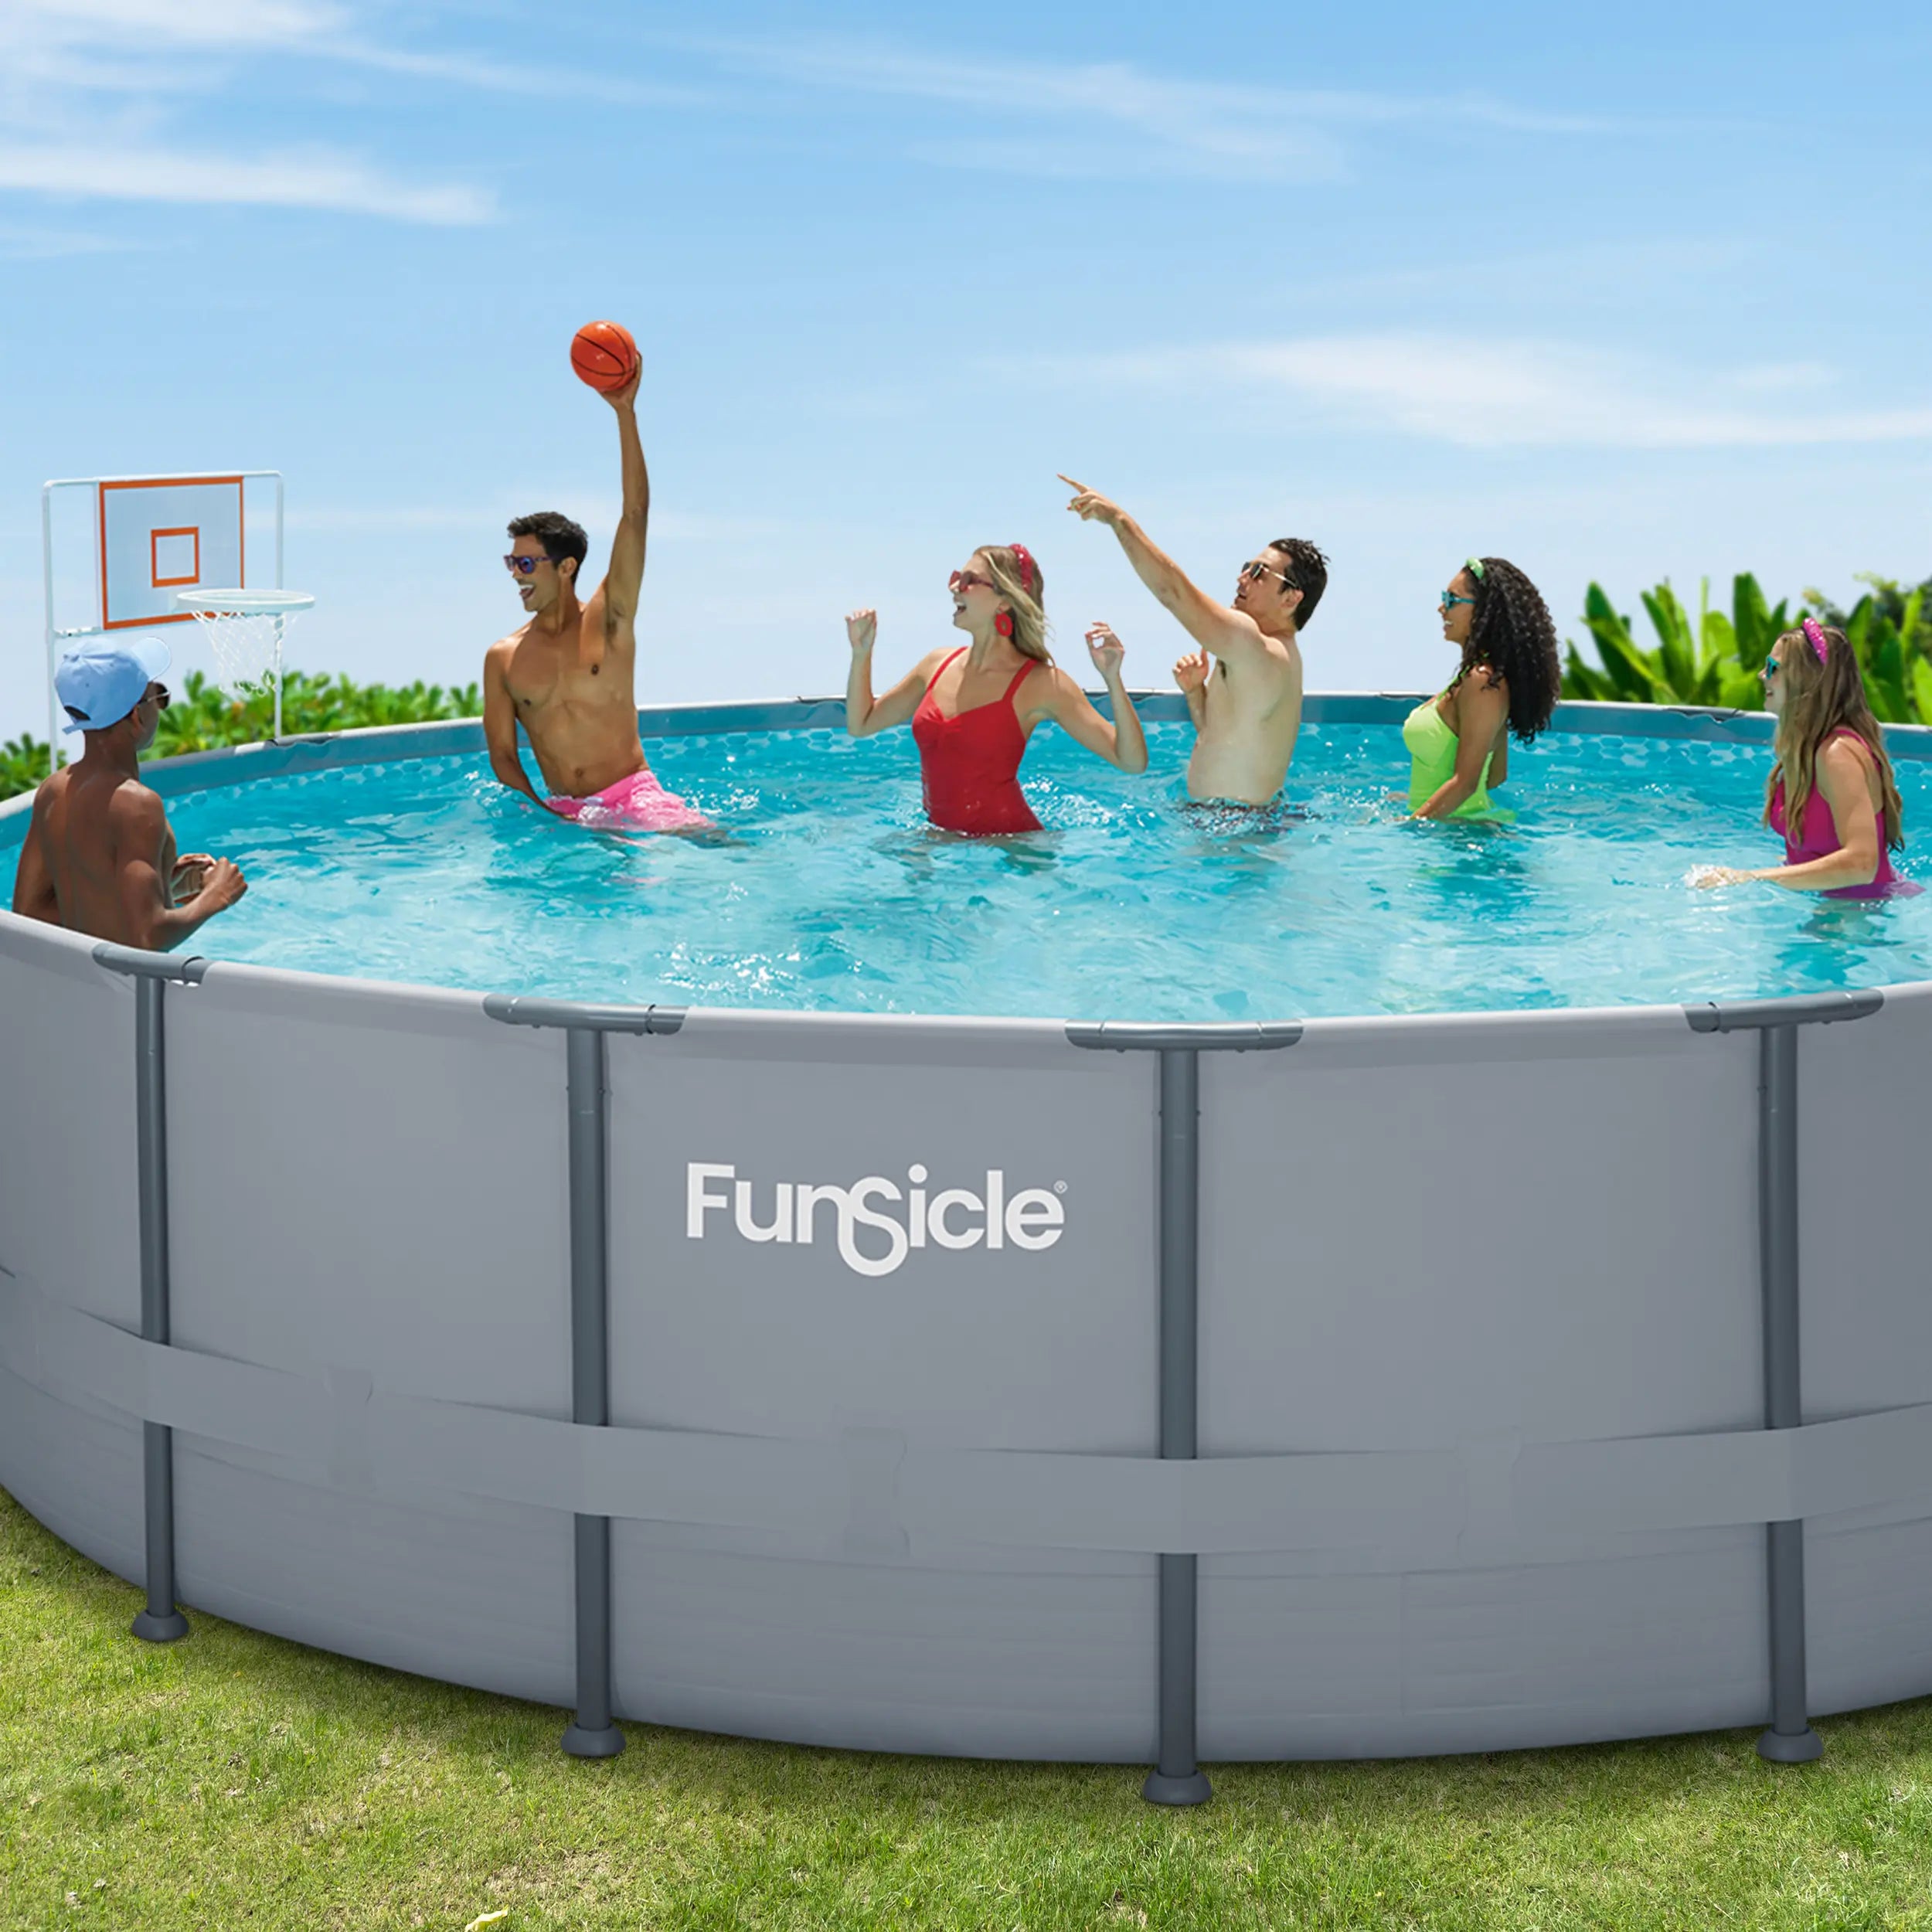 Funsicle Basketball Set with models